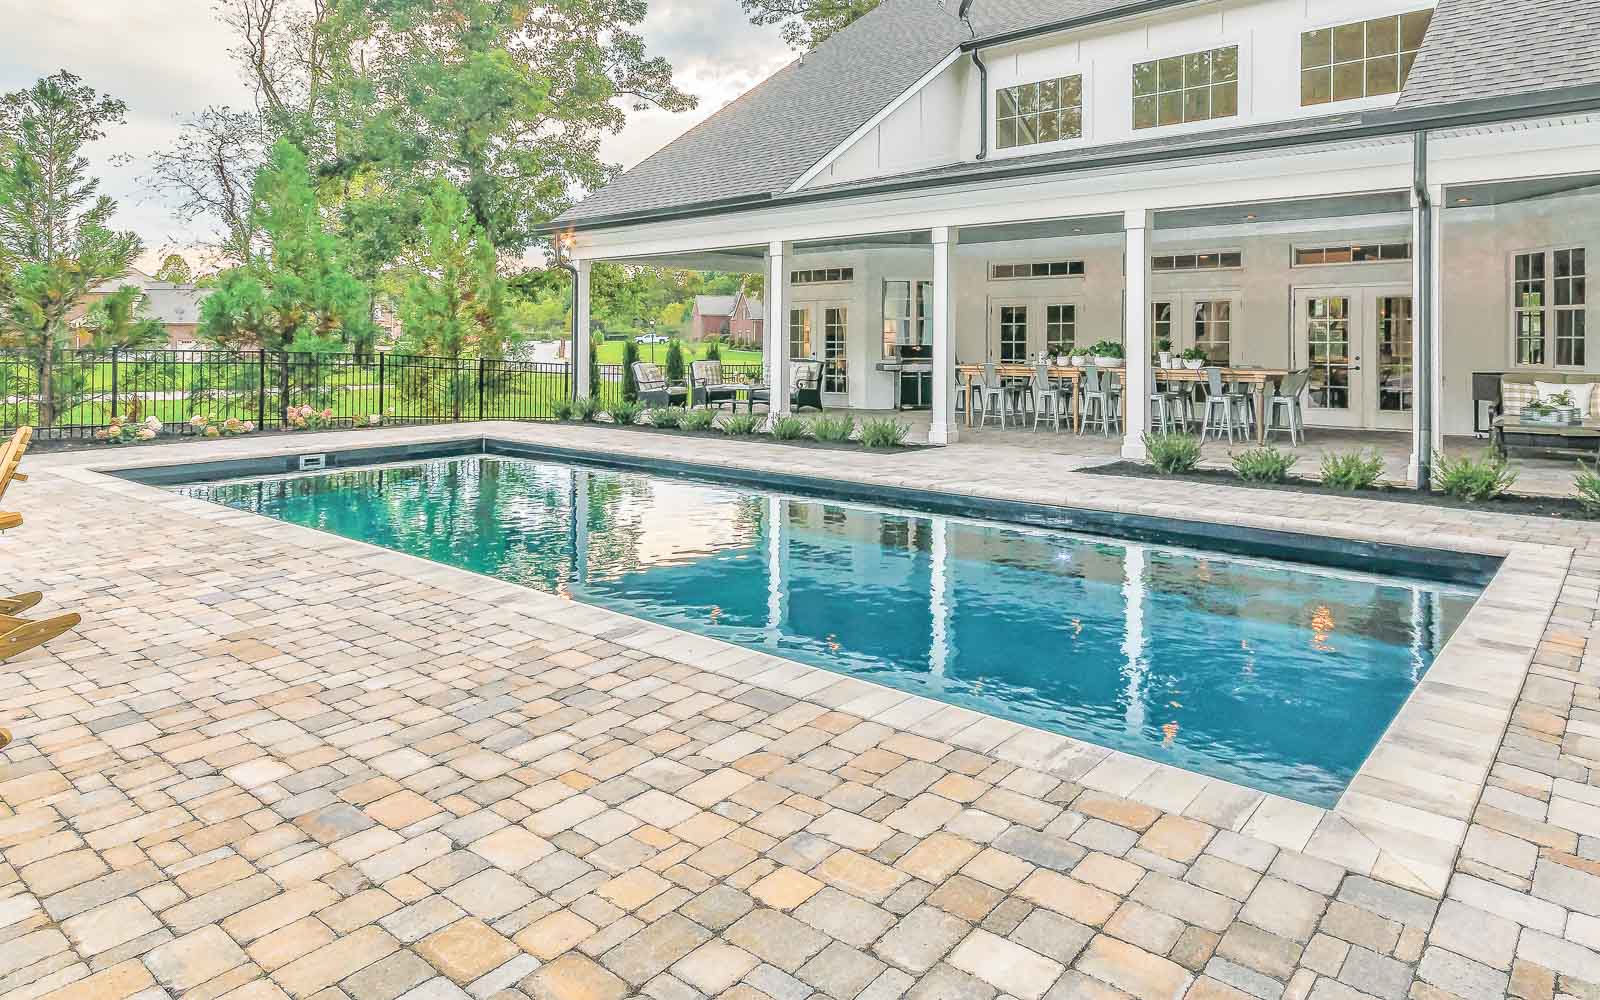 The Pool Company, your Leisure Pools fiberglass pool experts in greater Beaufort, South Carolina